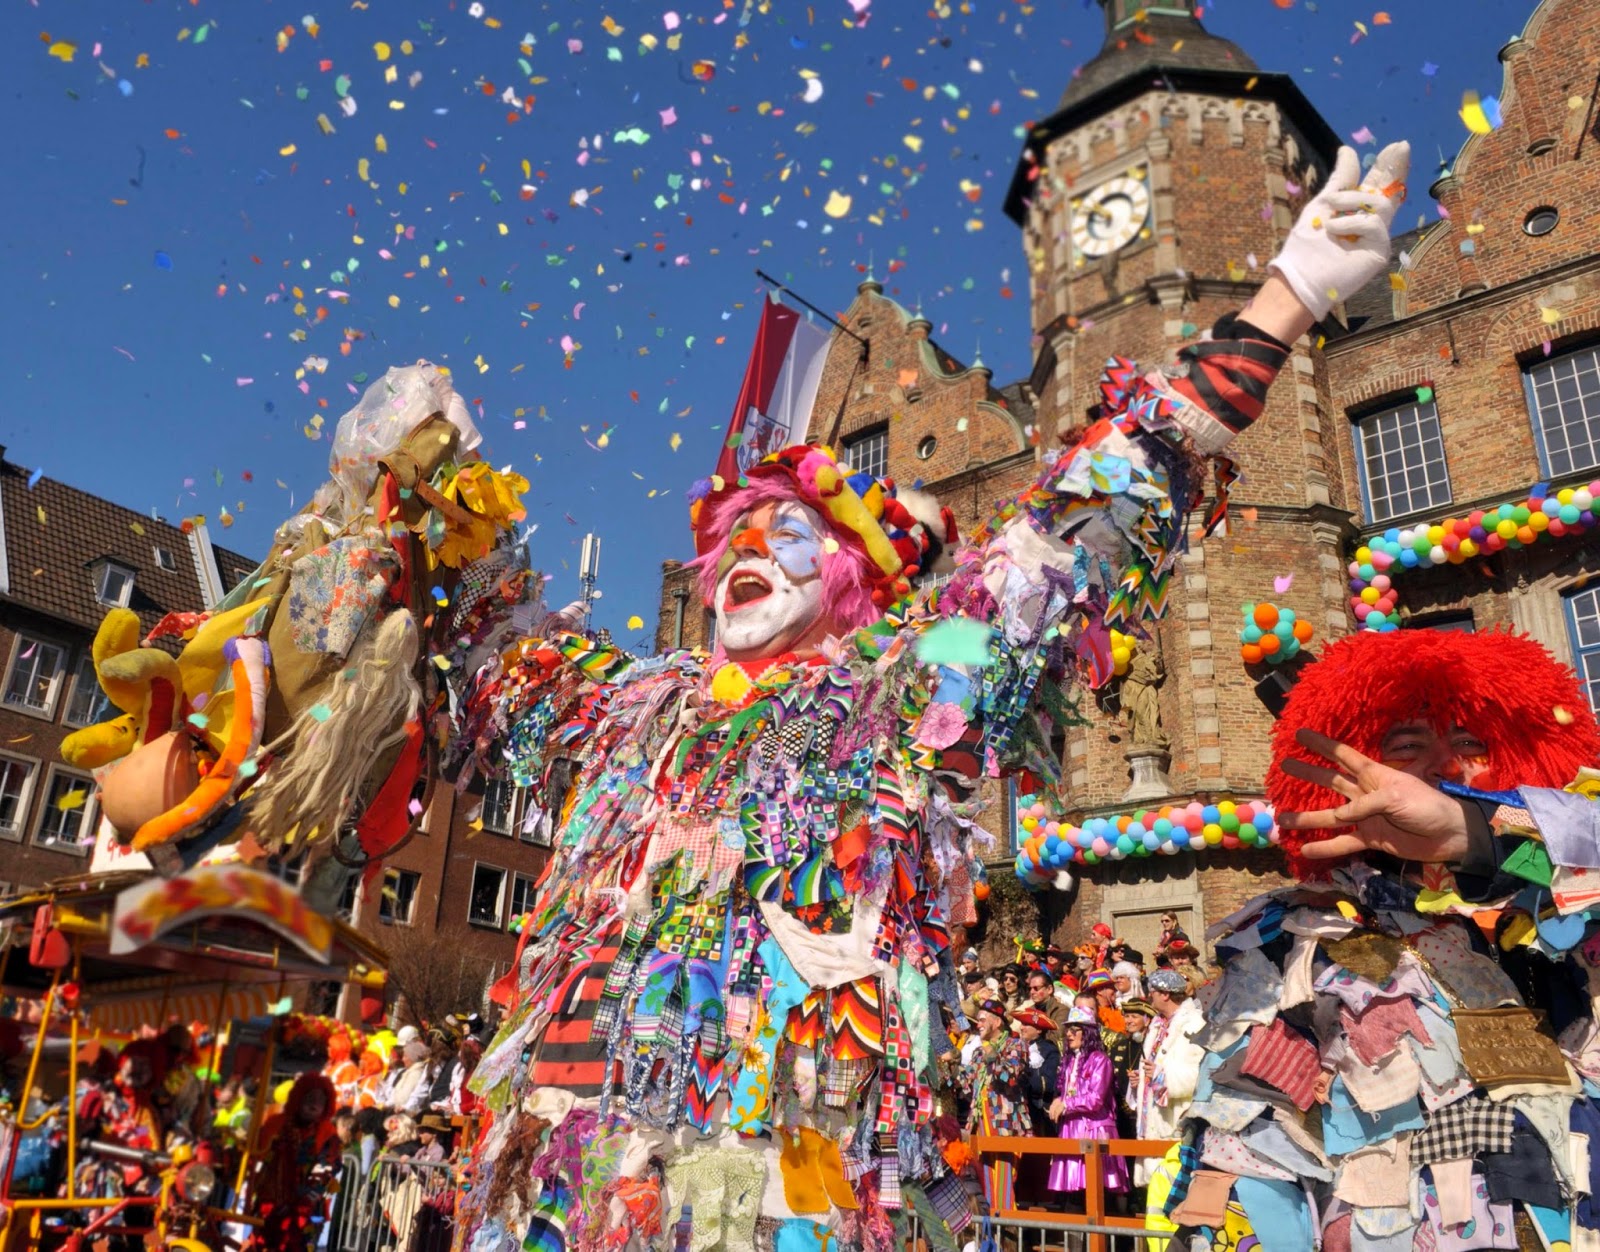 The Carnival in Cologne 2015, Germany